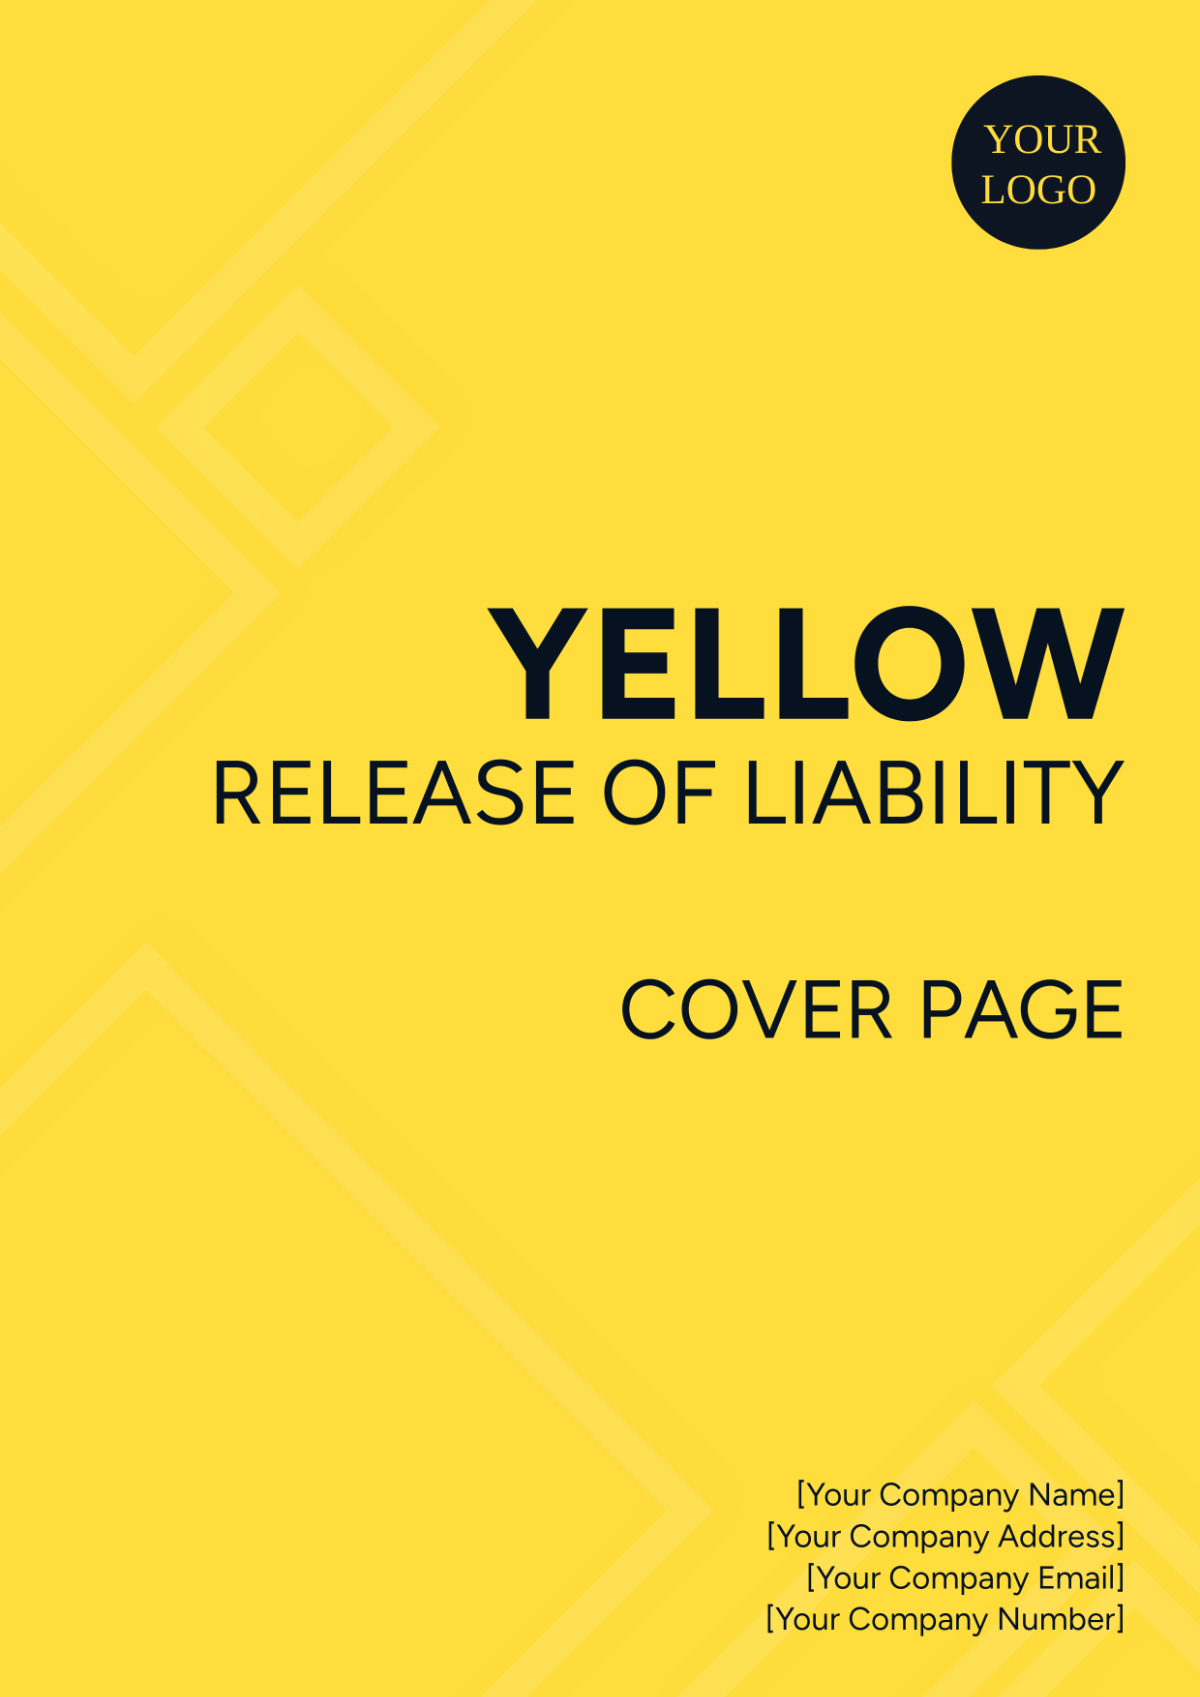 Yellow Release of Liability Cover Page